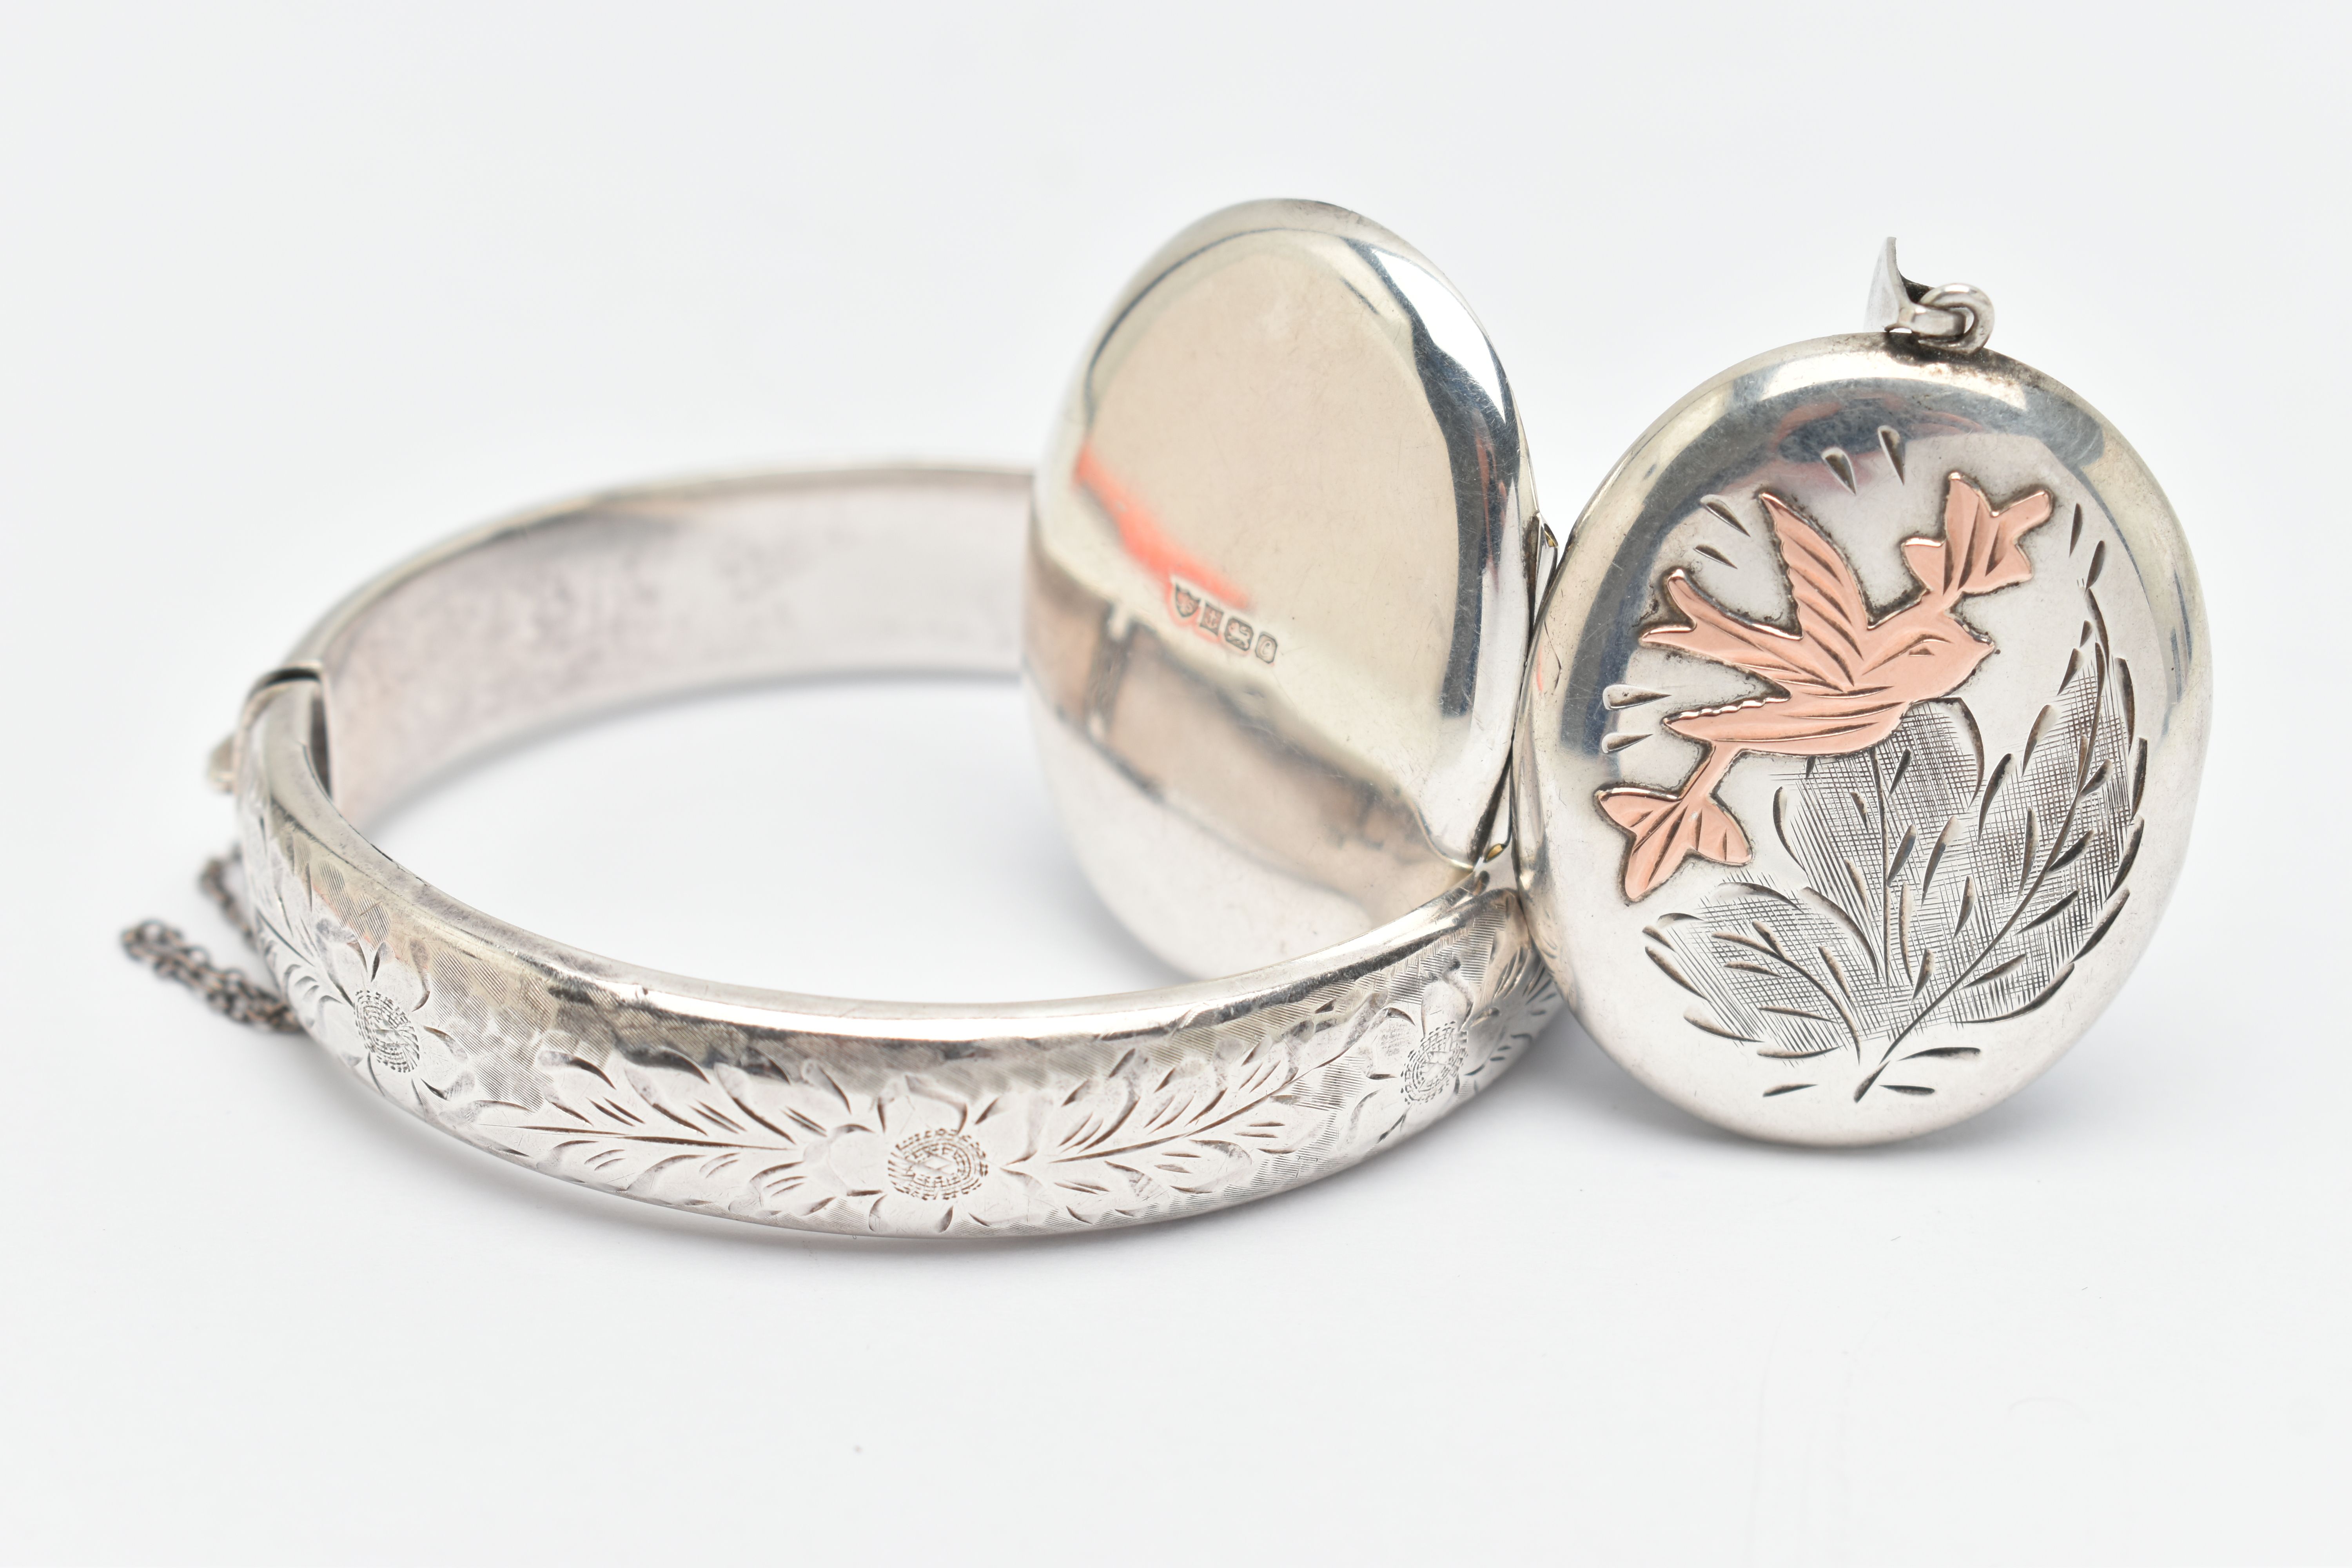 A SILVER HINGED BANGLE AND LOCKET, the bangle with floral pattern, fitted with a push piece